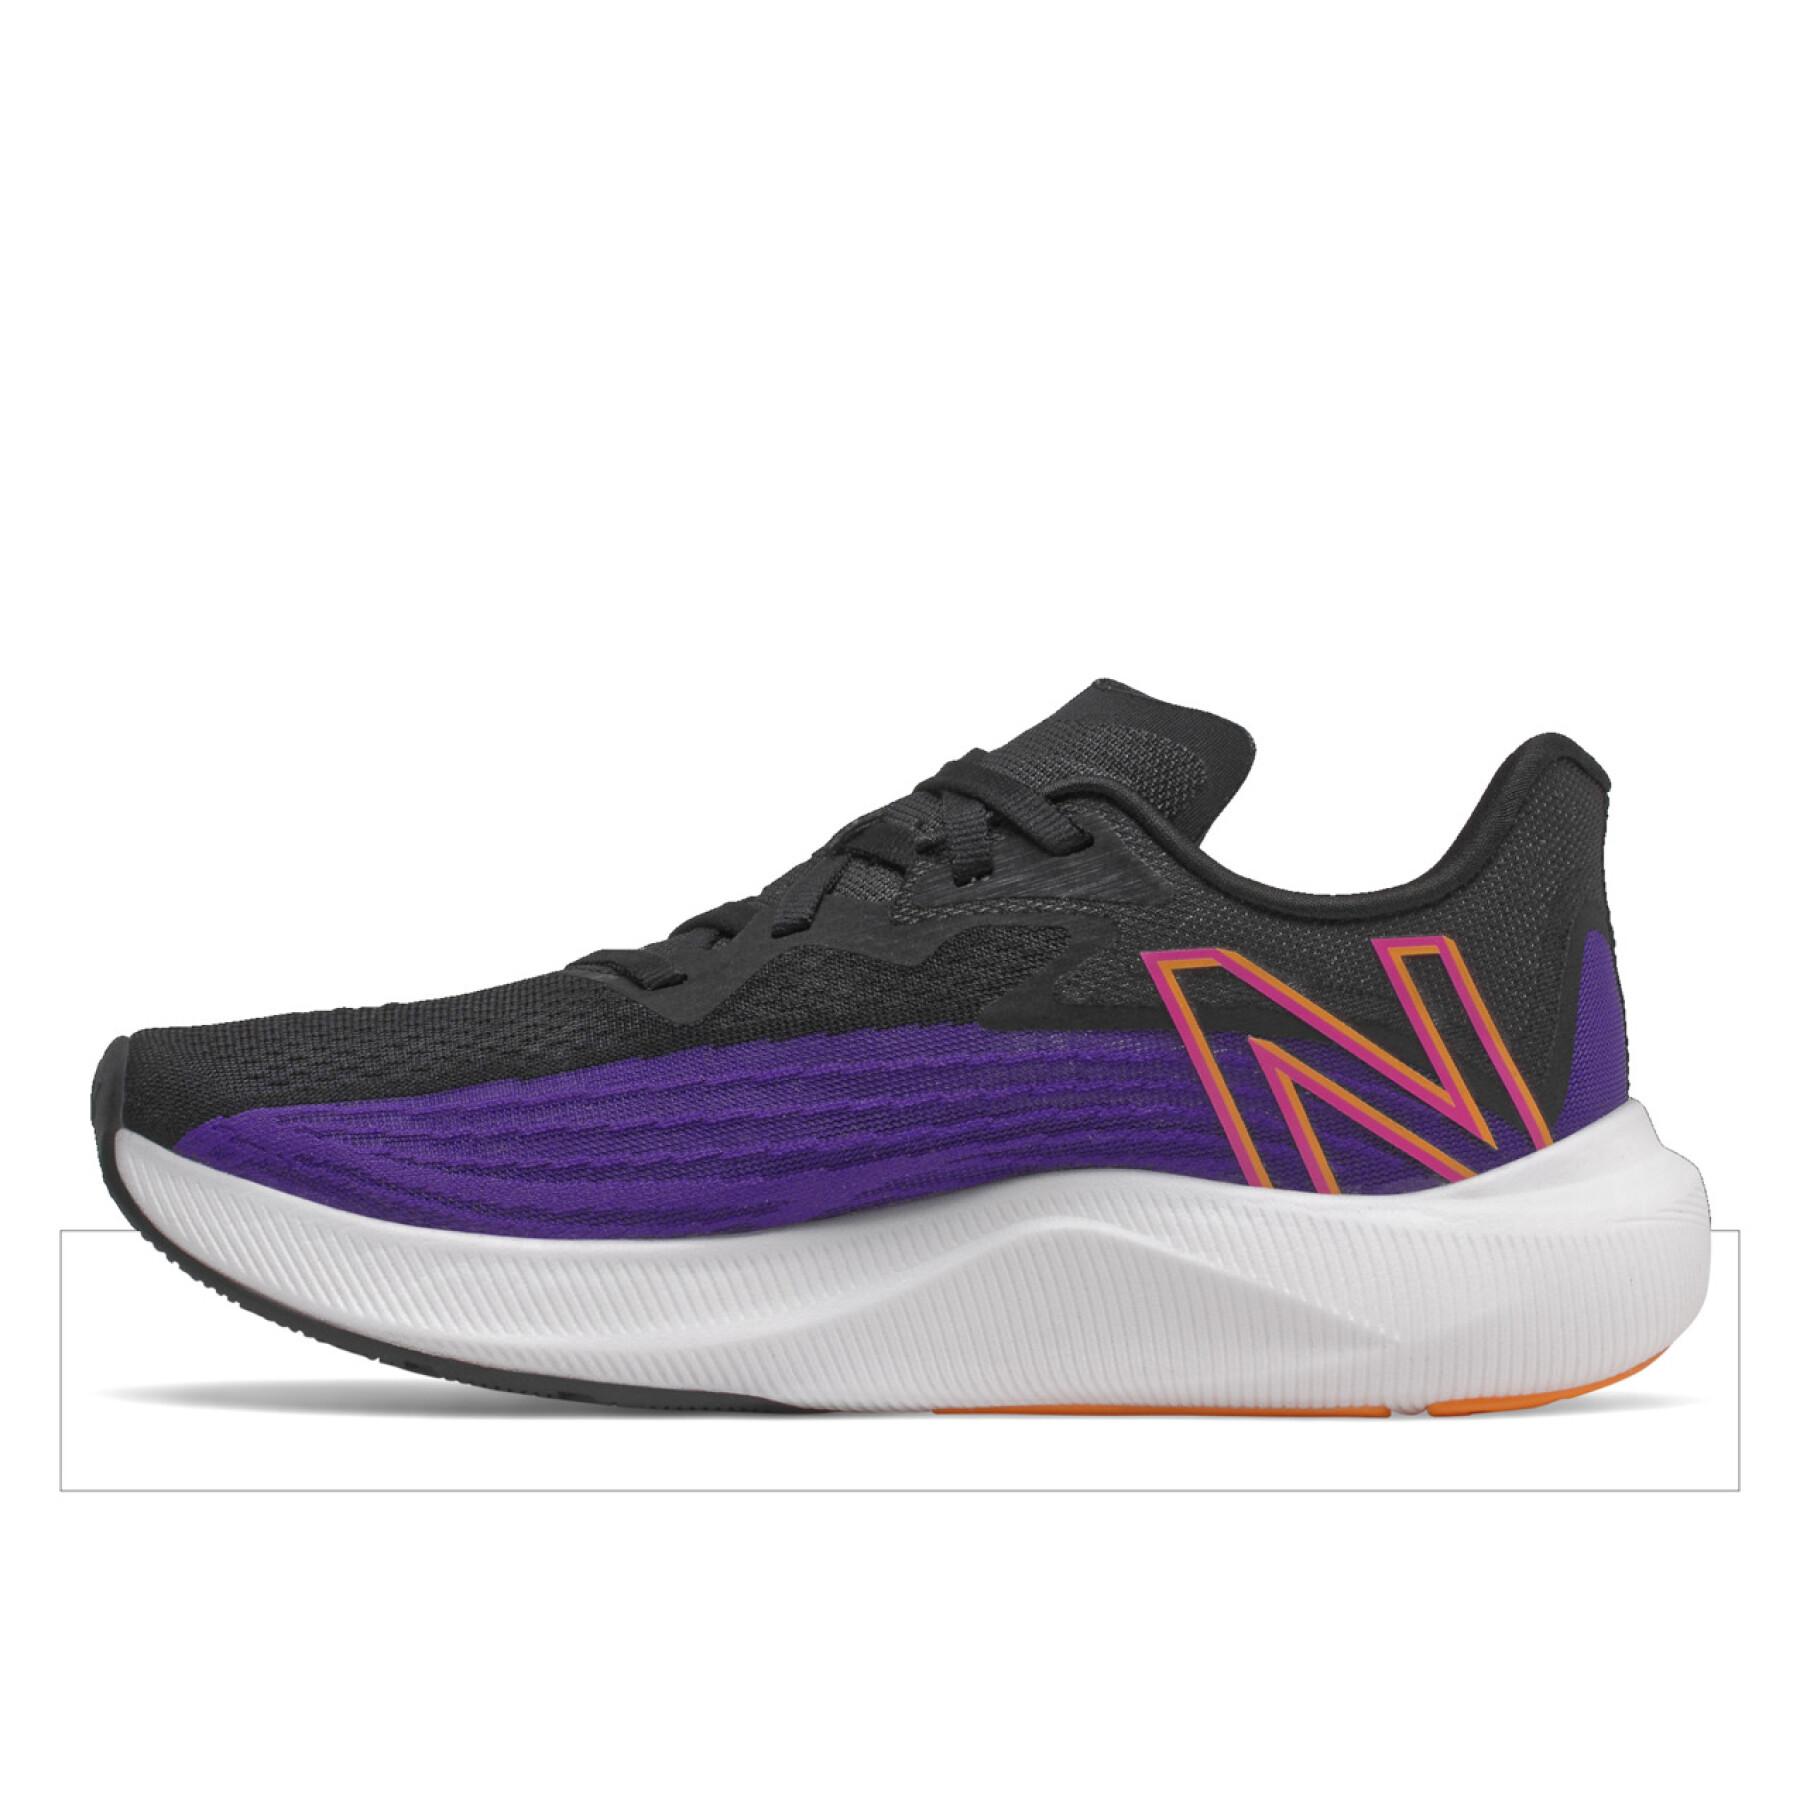 Chaussures femme New Balance fuelcell rebel v2